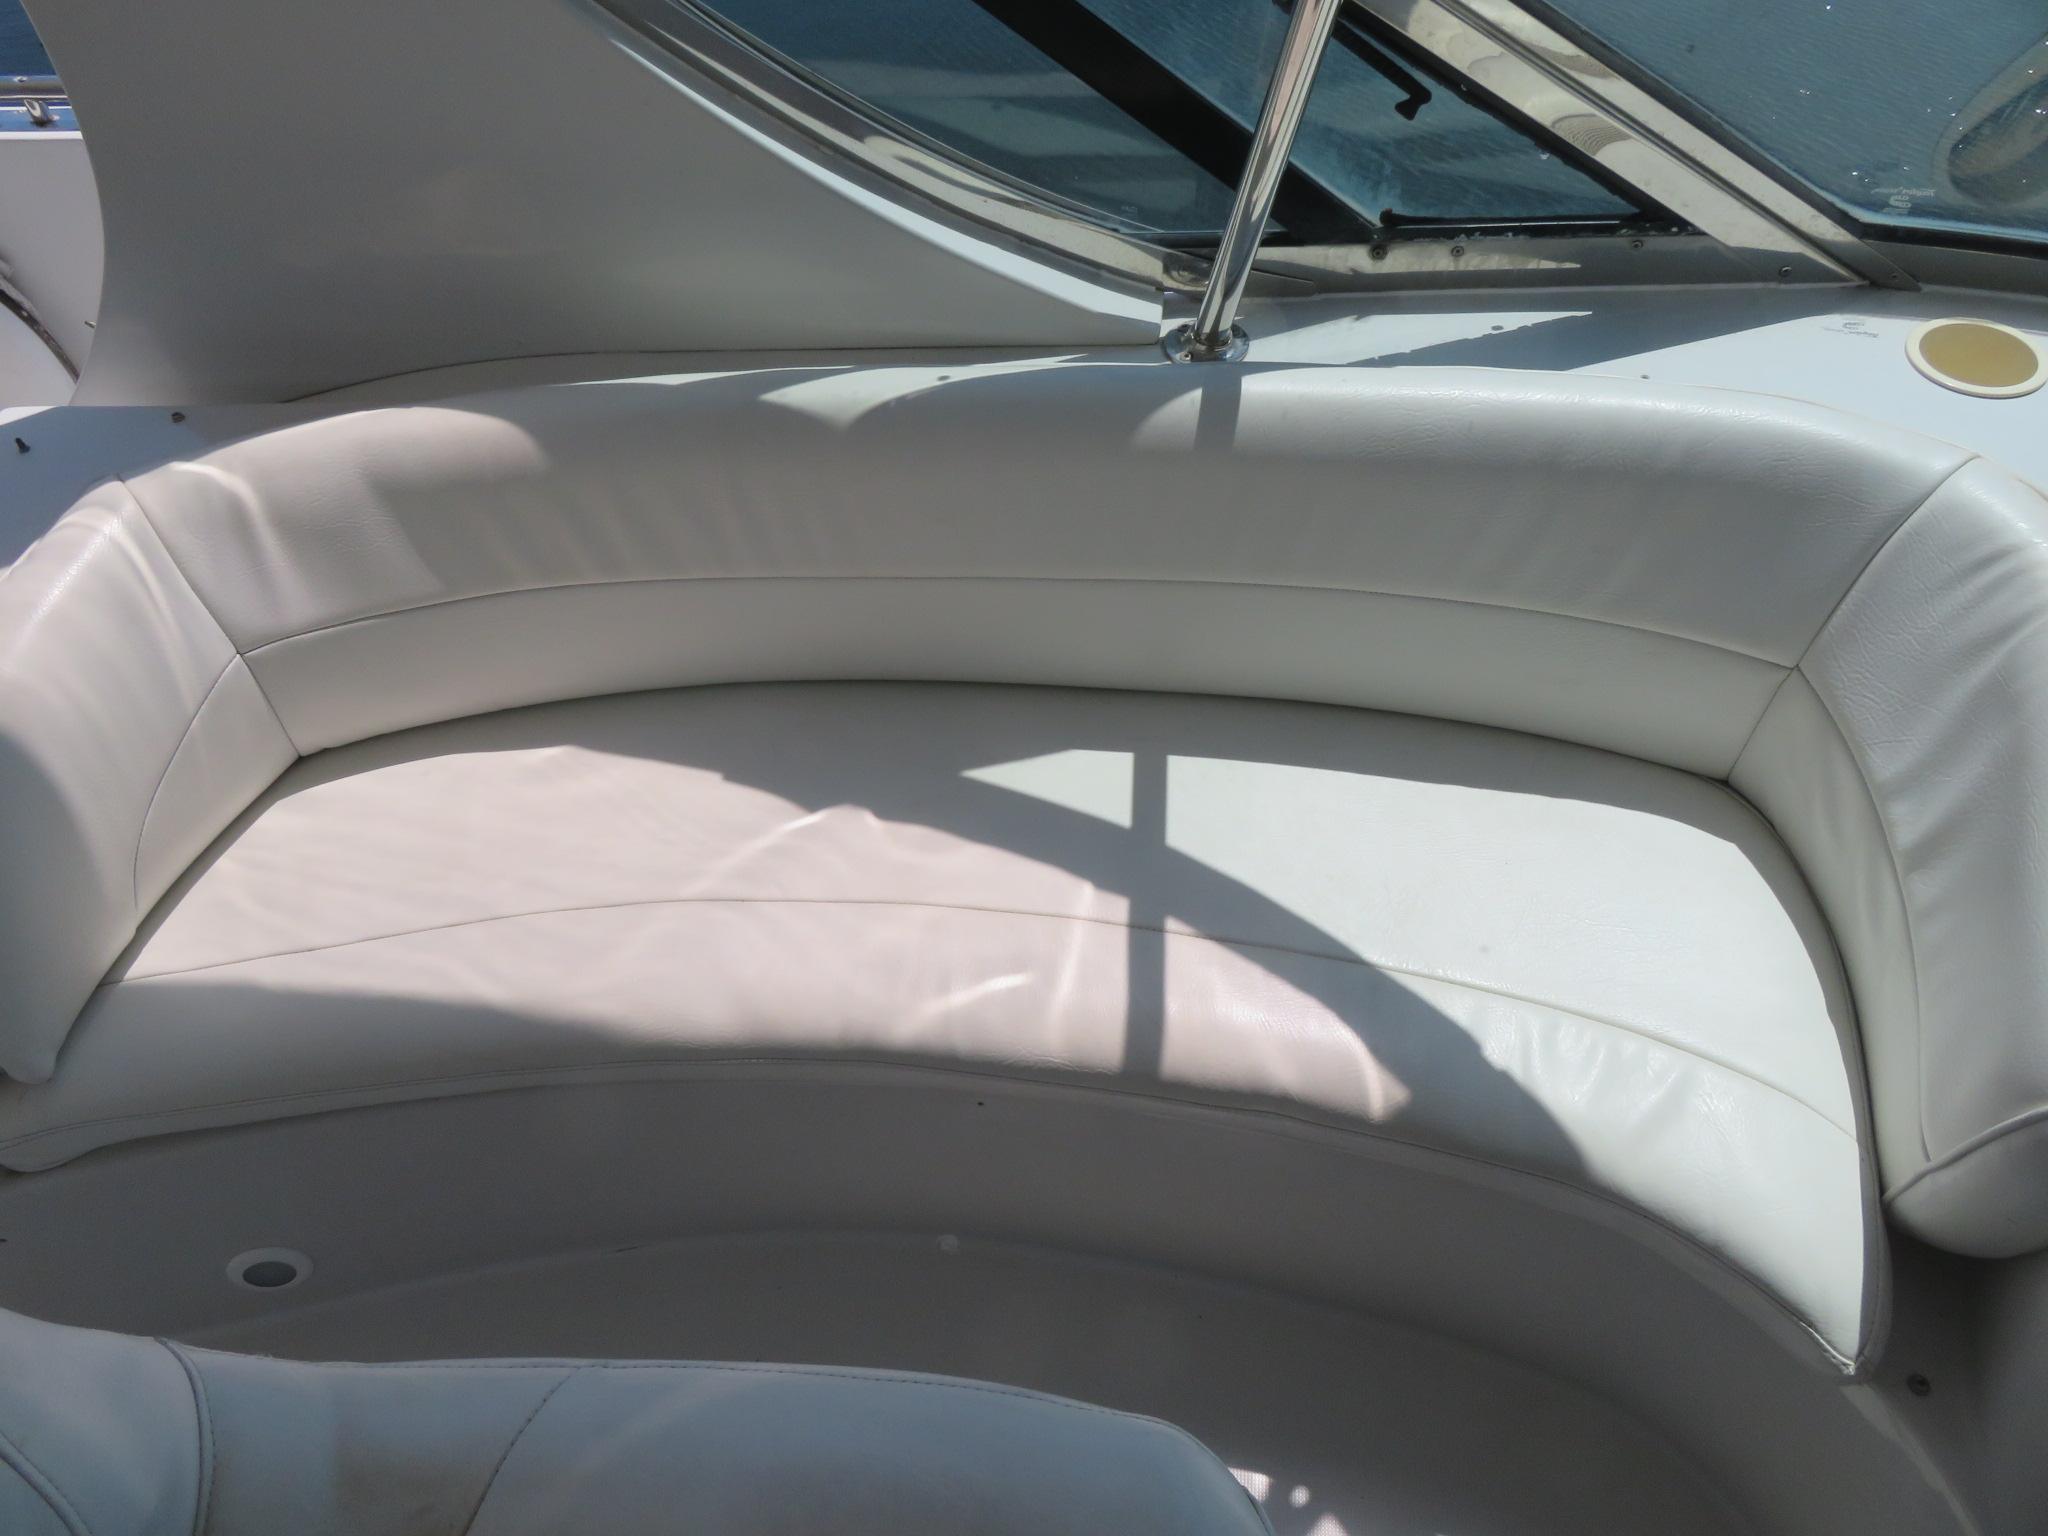 2000 Bluewater Yachts 5800 Motor Yacht